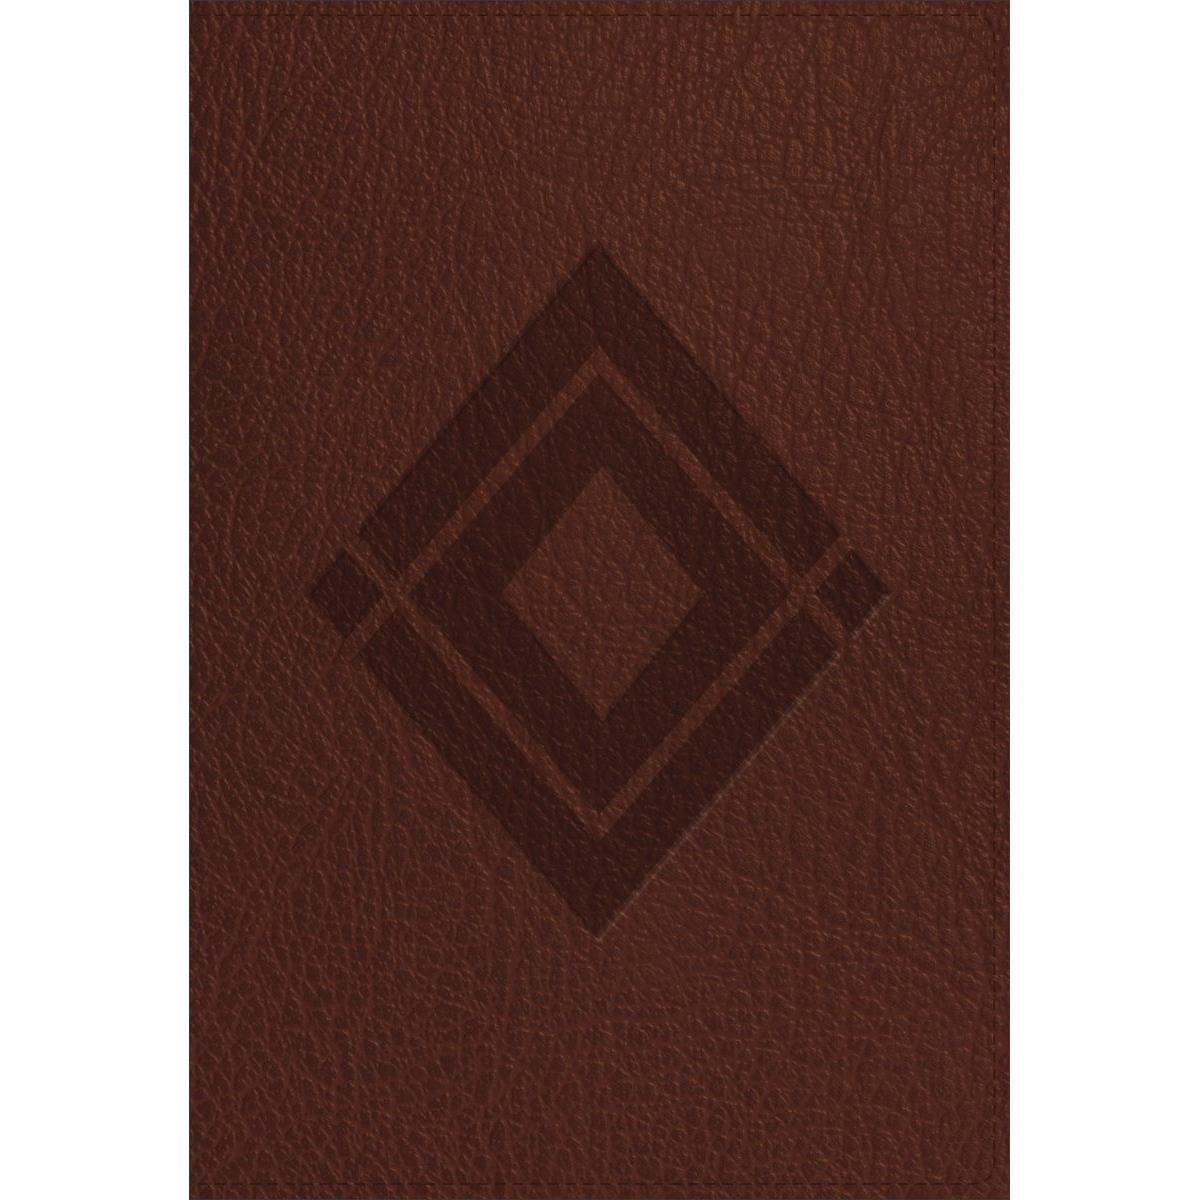 Baker Publishing Group 141765 Csb Baker Illustrated Study Bible, Brown - Diamond Design Leather Touch